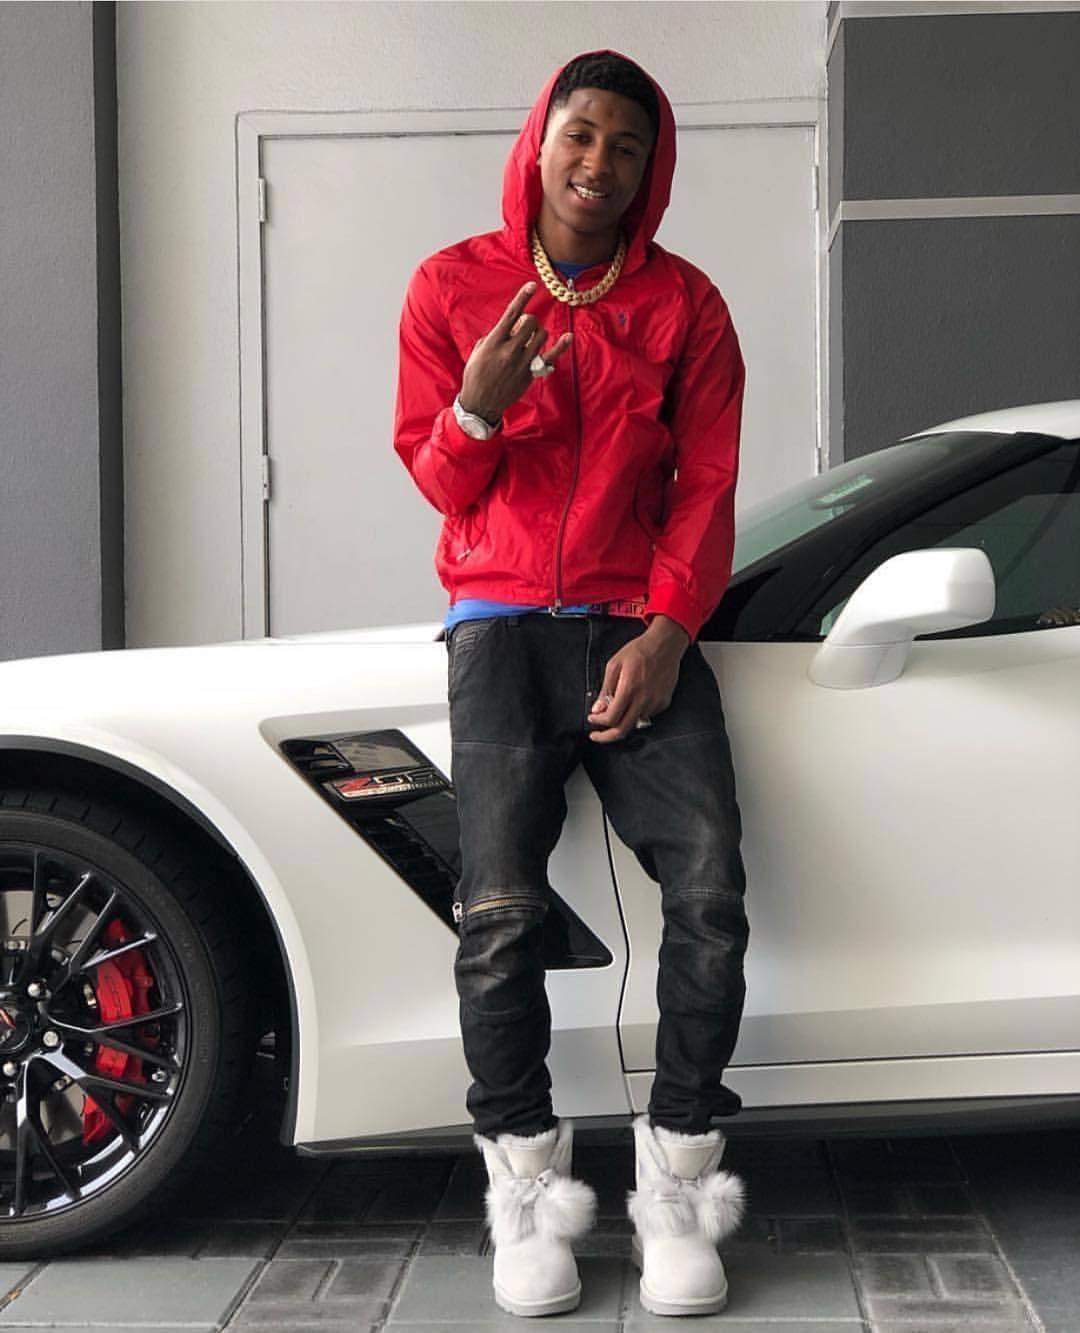 Youngboy NBA Youngboy wallpaper Android क लए APK डउनलड कर